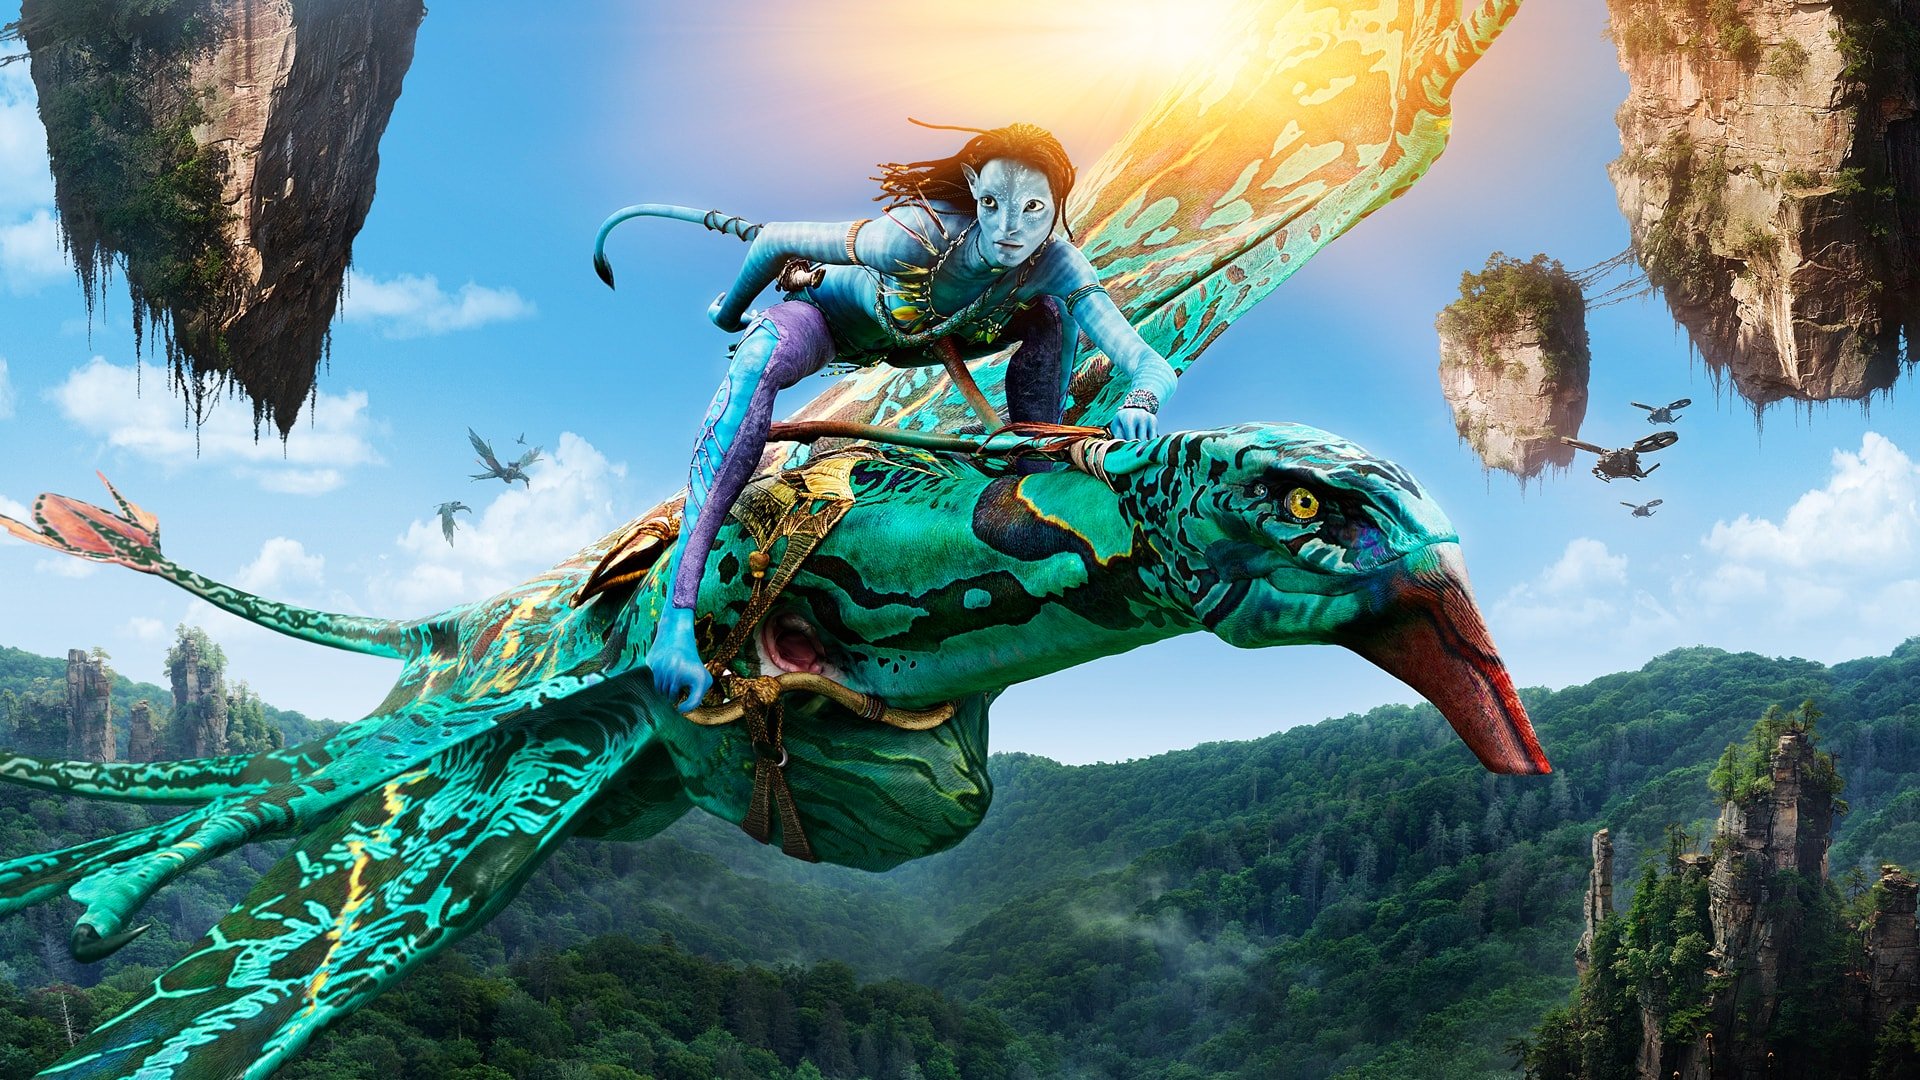 Frontiers Of Pandora Explains Why It's An Exclusive Next Gen Video Game